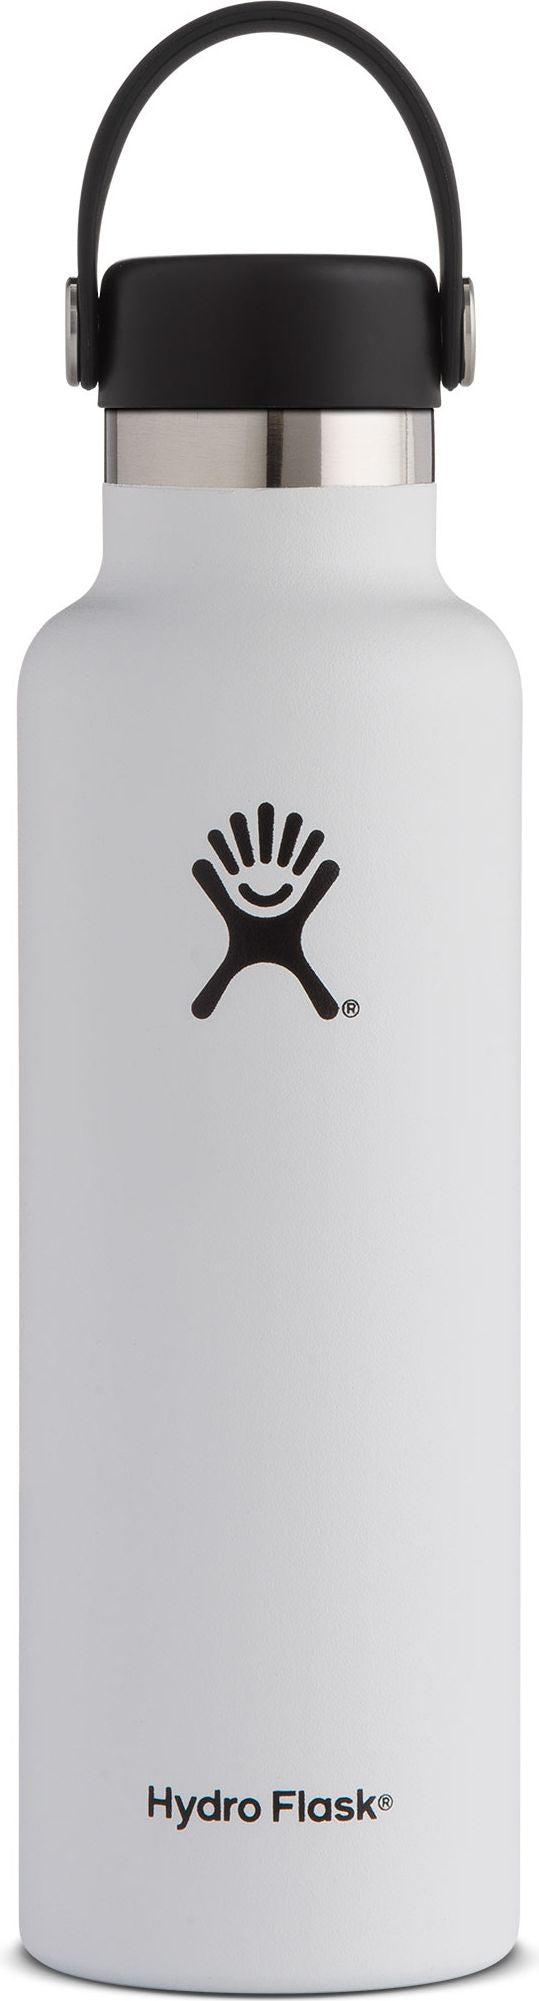 Hydro Flask Accessories 21oz Standard Mouth White